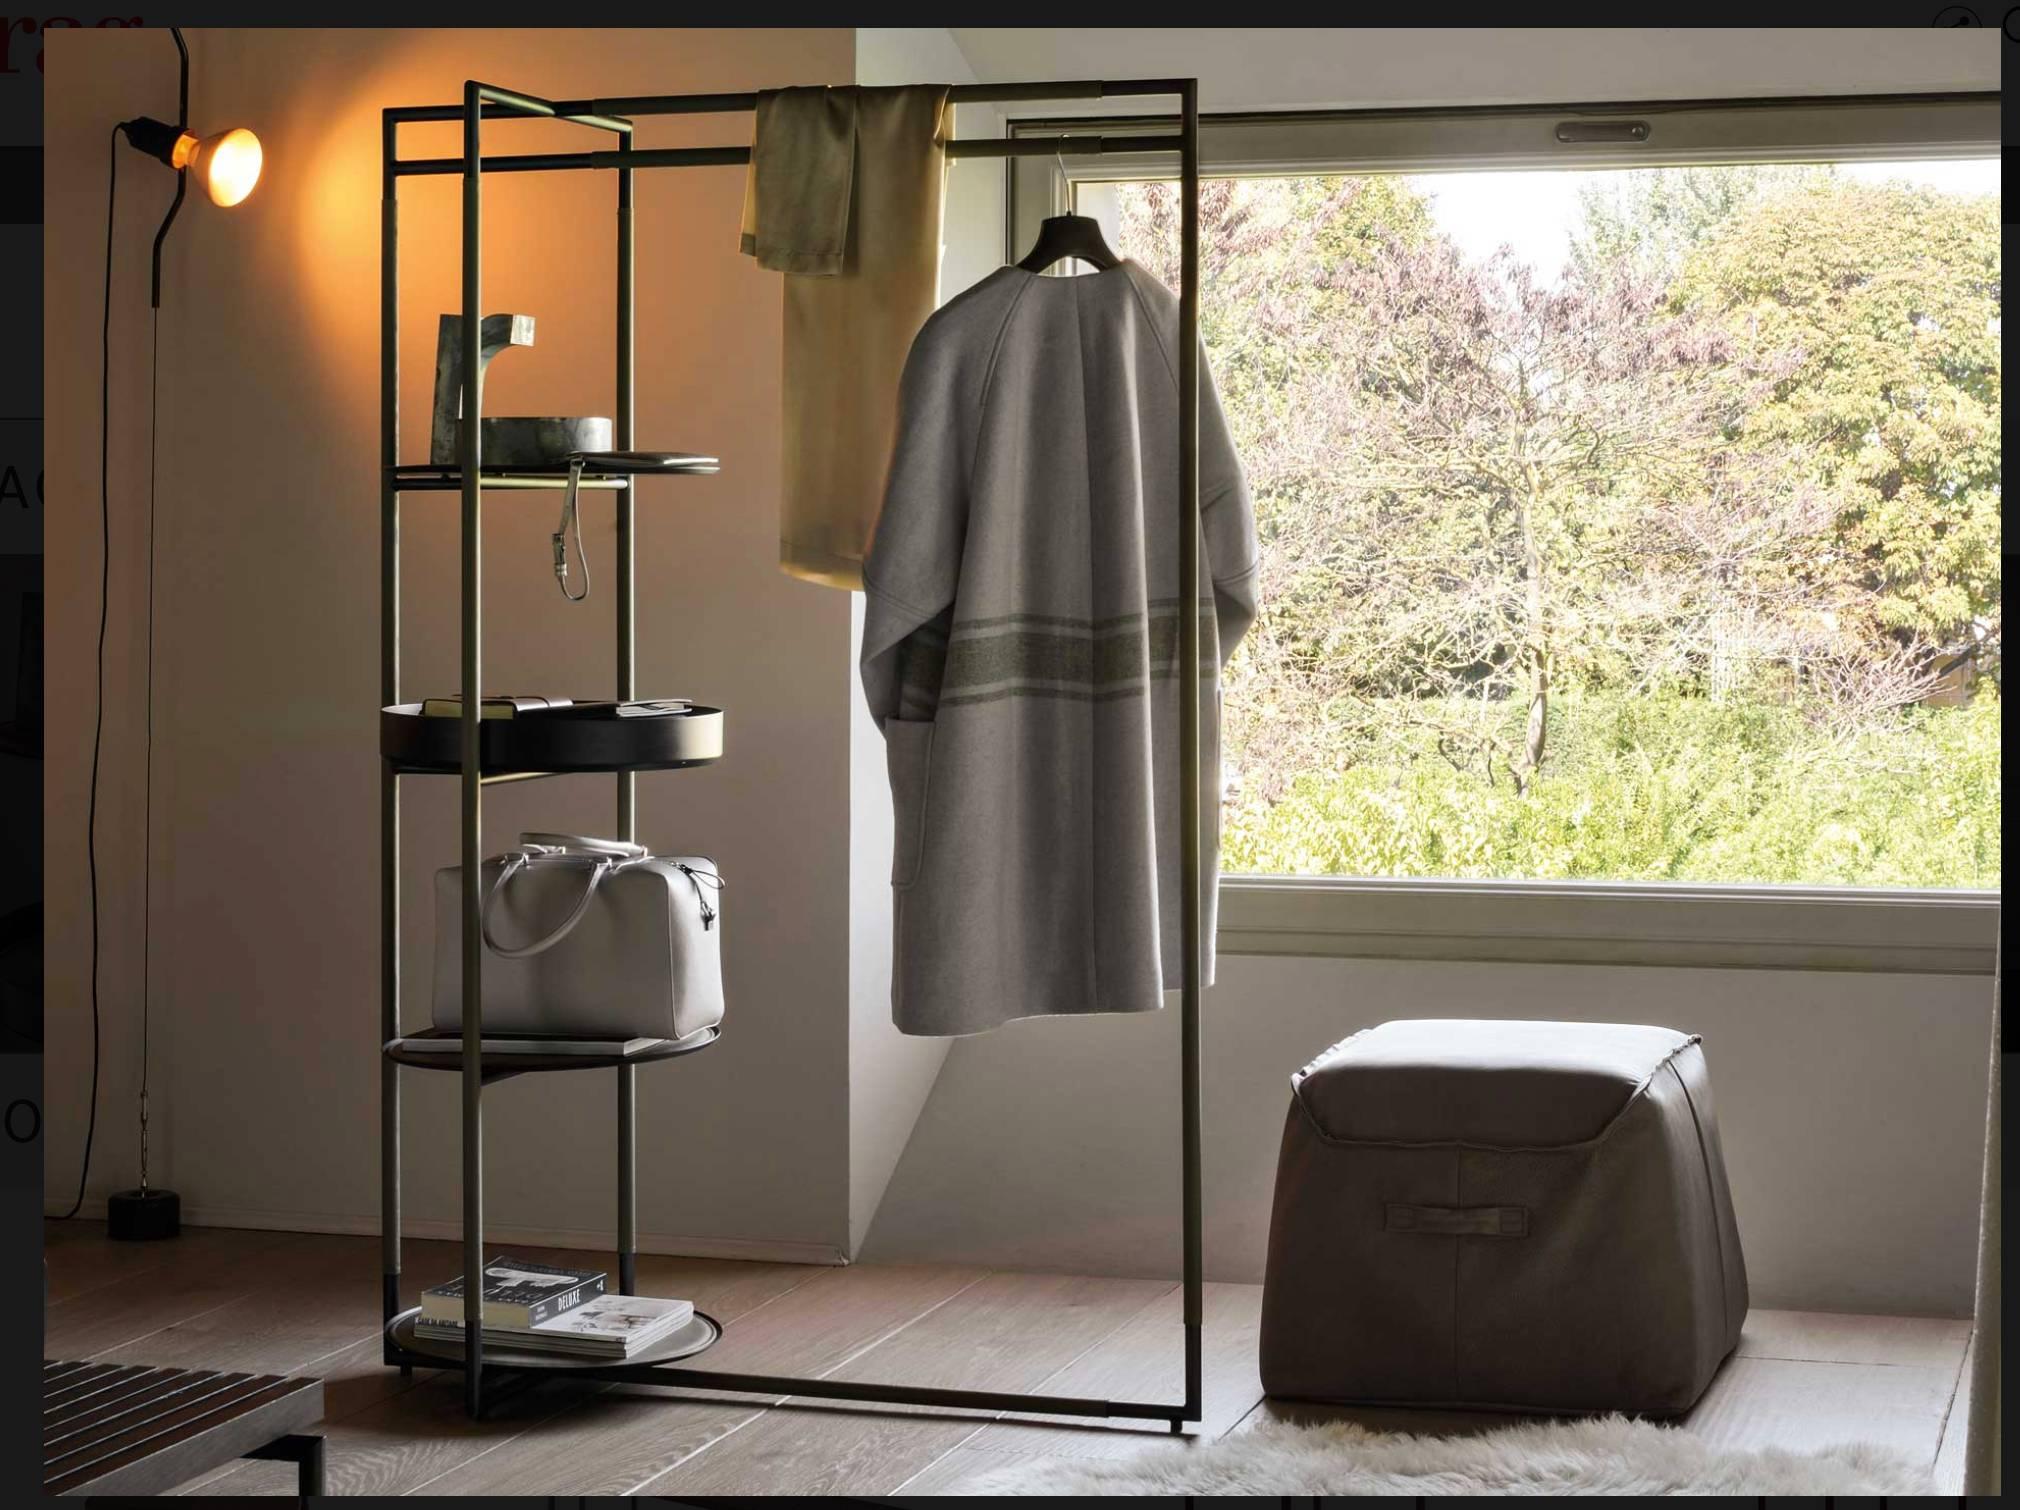 Bak valet stand
by Ferruccio Laviani

Valet stand with a brushed black steel frame upholstered with leather and slightly padded leather-upholstered steel shelves.

Measures: H 165, W 110, D 49.